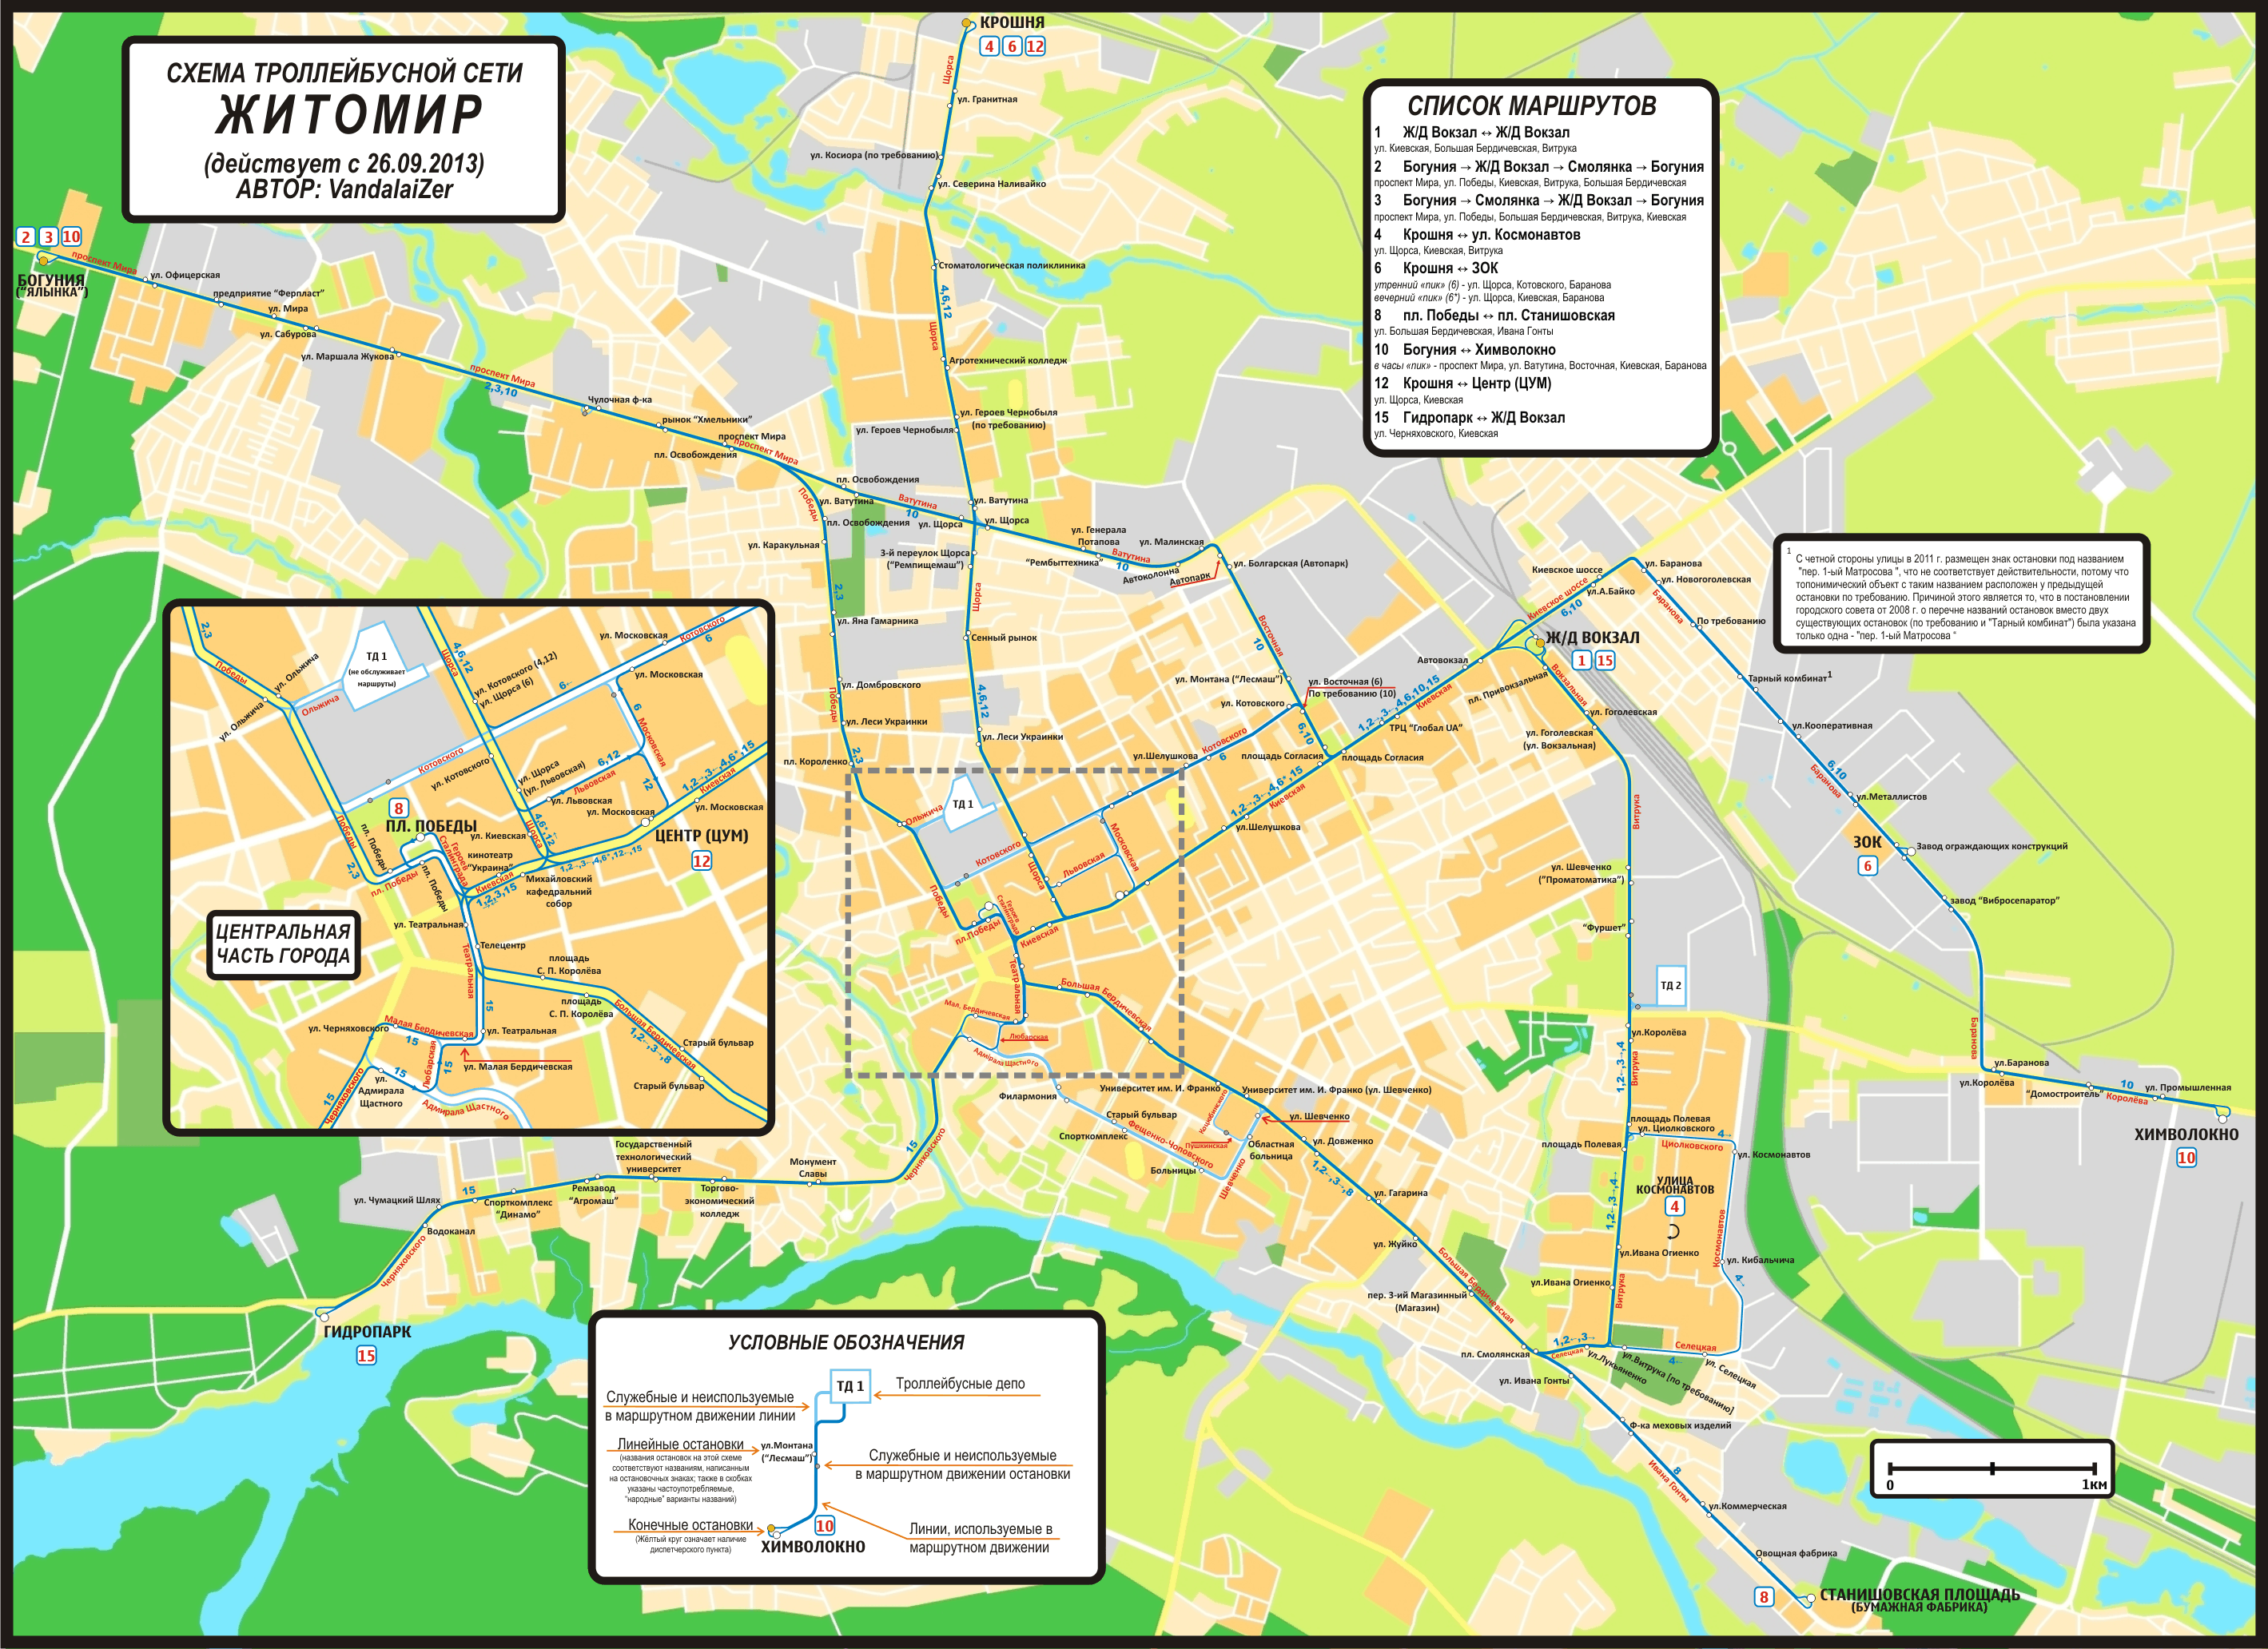 Jytomyr — Tram (since 1975) and trolleybus routes